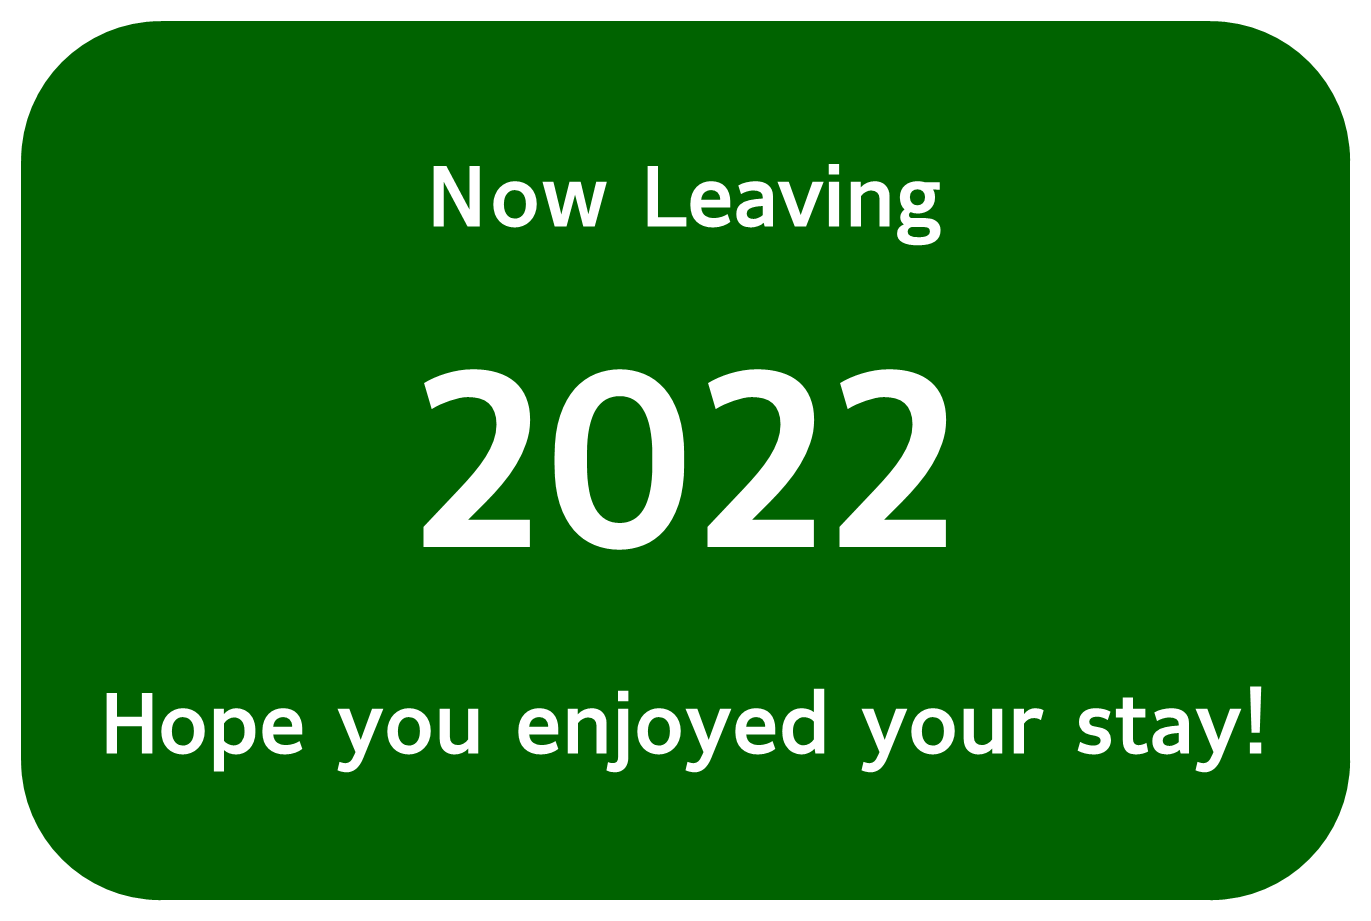 Now Leaving 2022 - hope you enjoyed your stay!